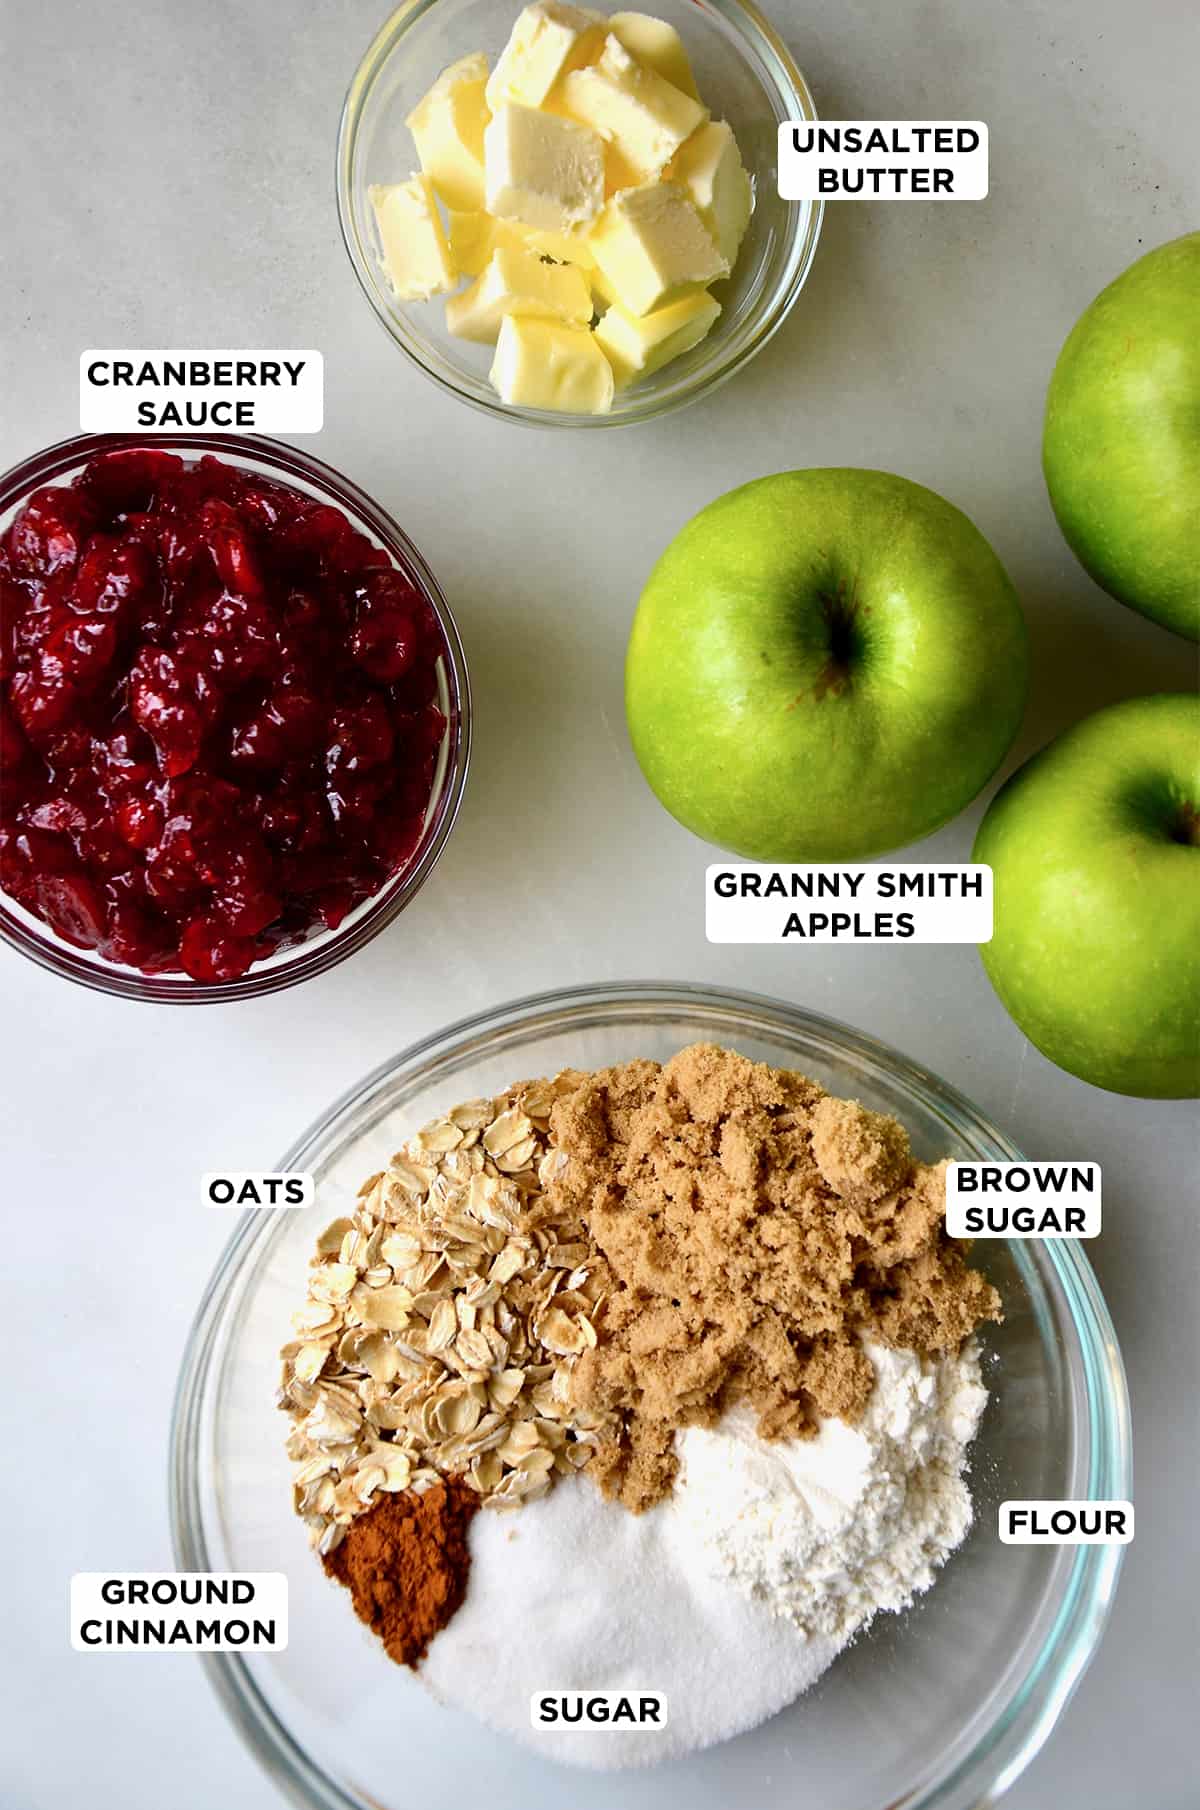 Granny Smith apples next to a bowl containing cranberry sauce, a bowl with cubed butter, and a bowl containing oats, brown sugar, flour and spices.